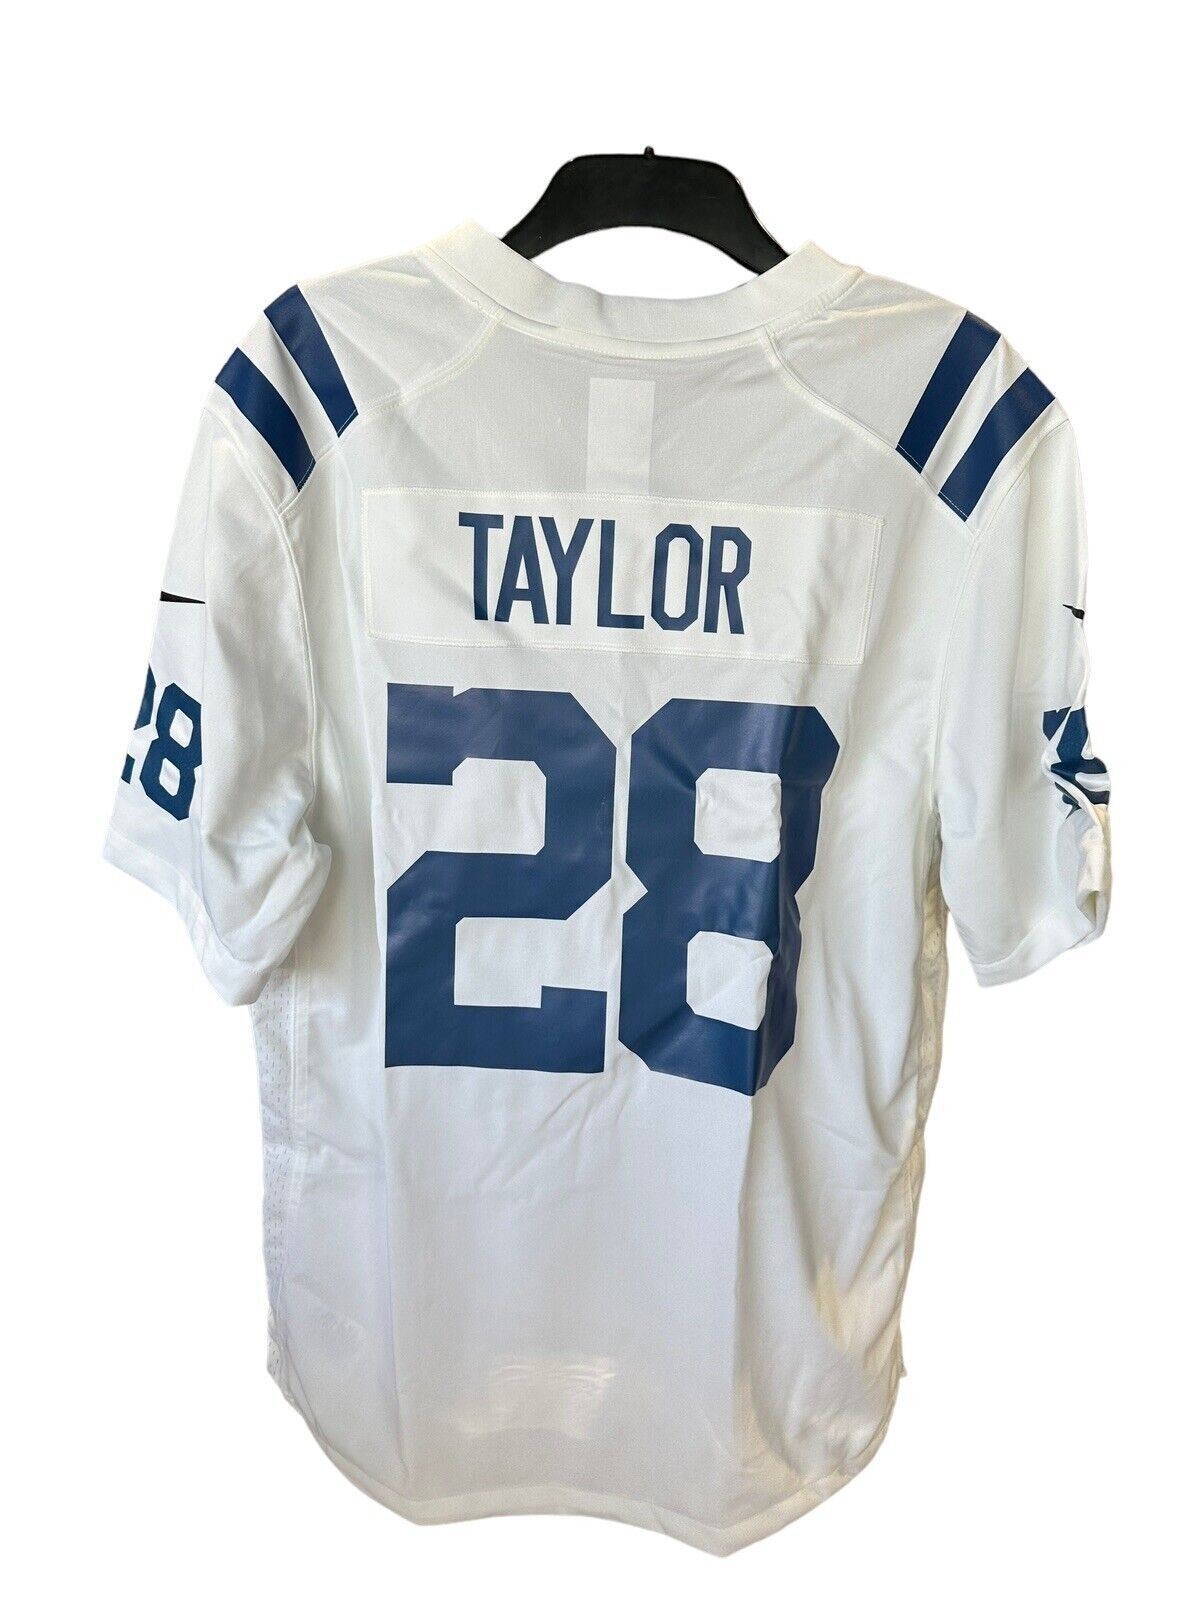 Nike NFL Indianapolis Colts Jersey TAYLOR 28 Mens Large.